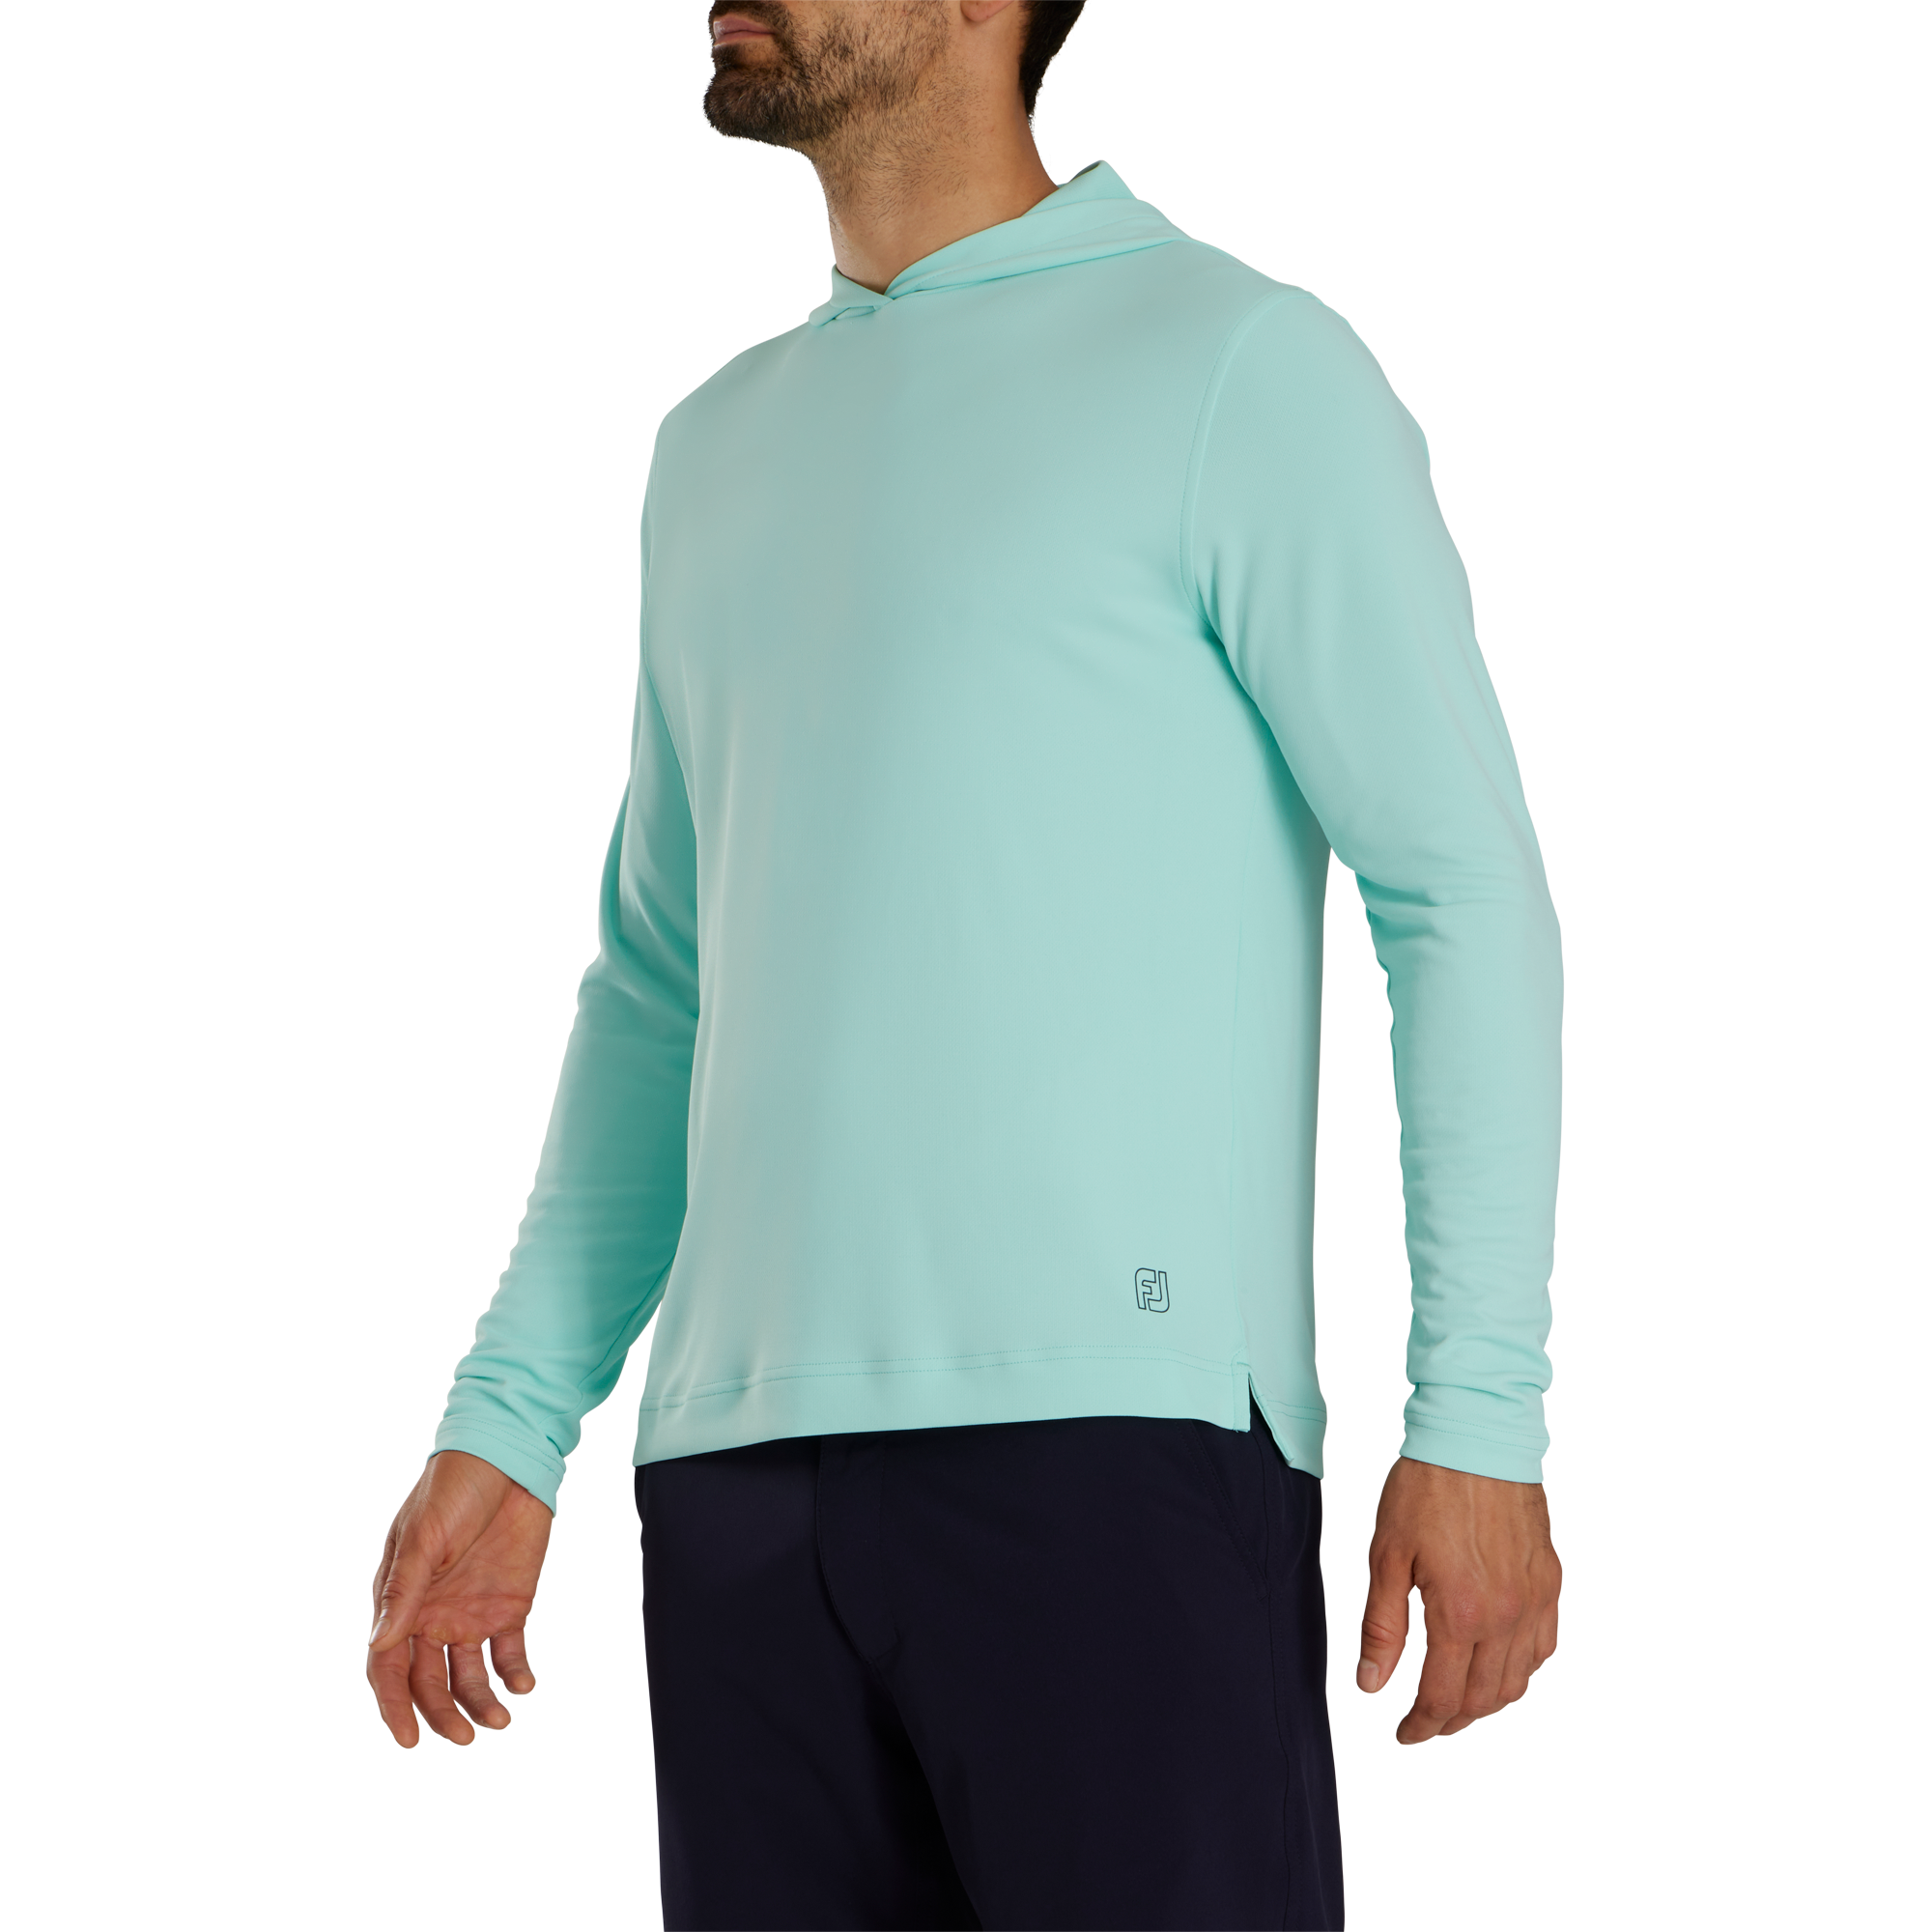 Quick Dry and Lightweight Fishing Jersey Hoodie with Sun Protection in  S-6XL Plus Size FT0096